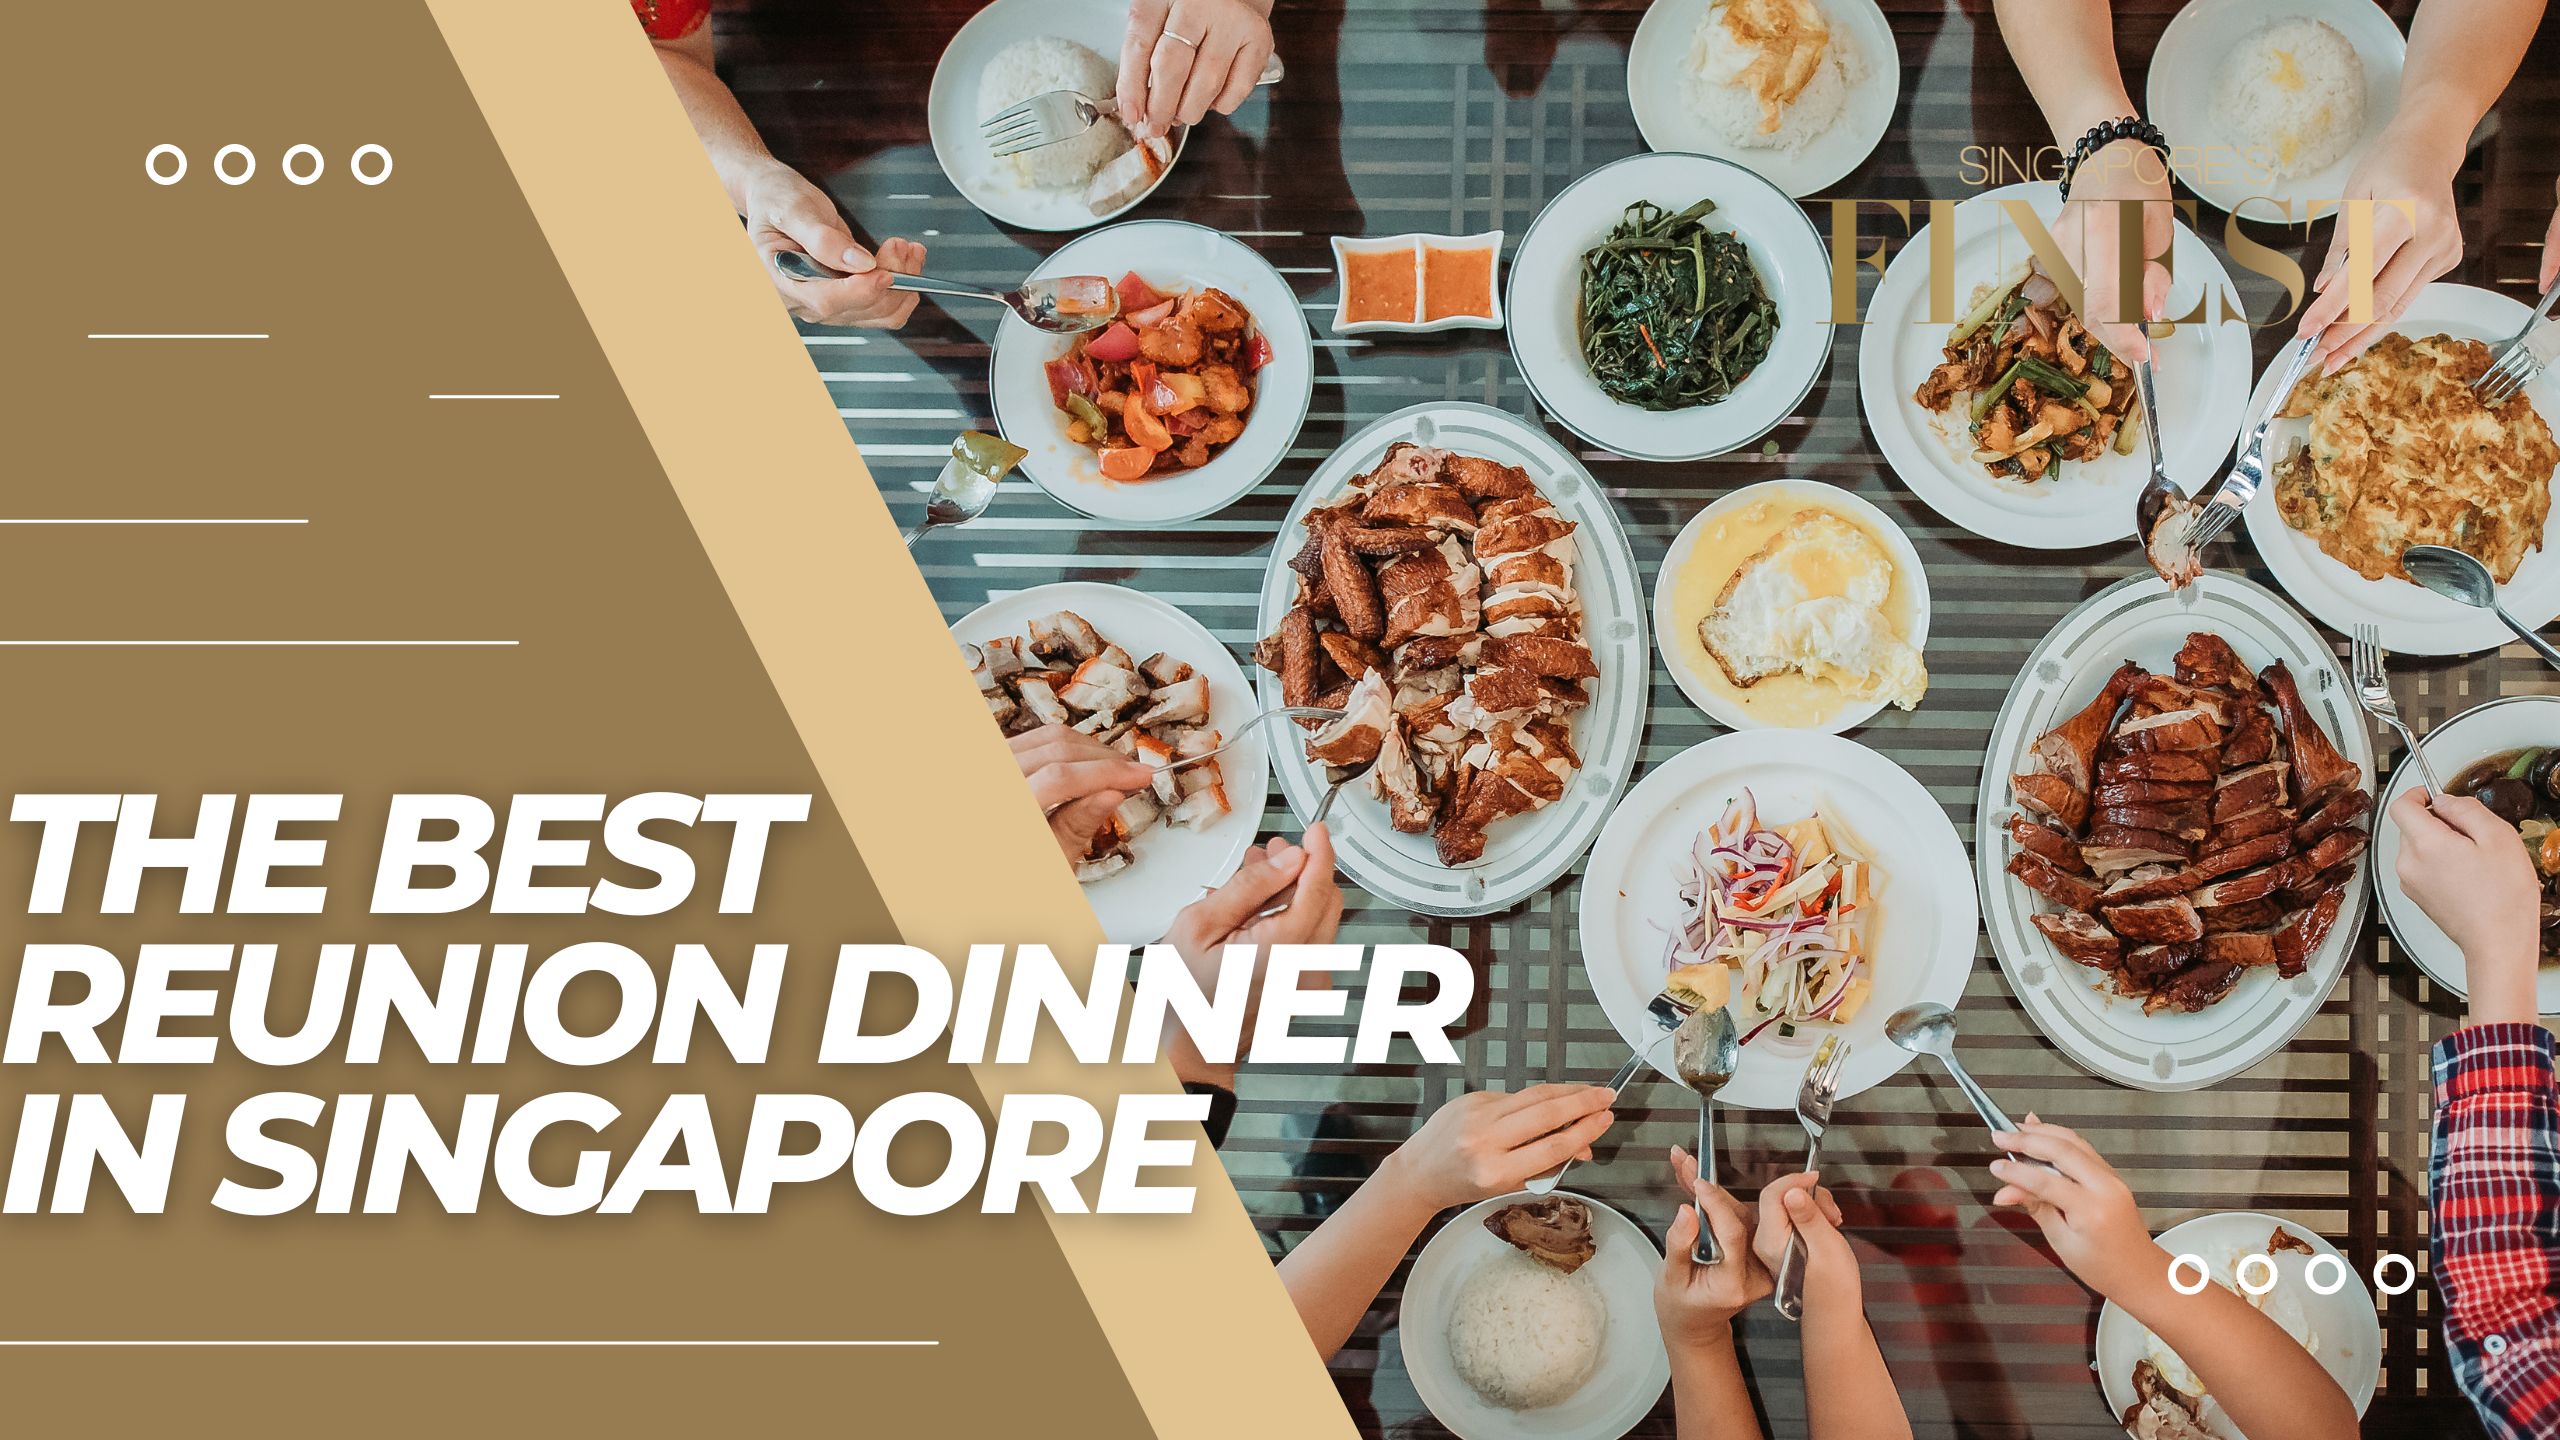 The Finest Reunion Dinner in Singapore